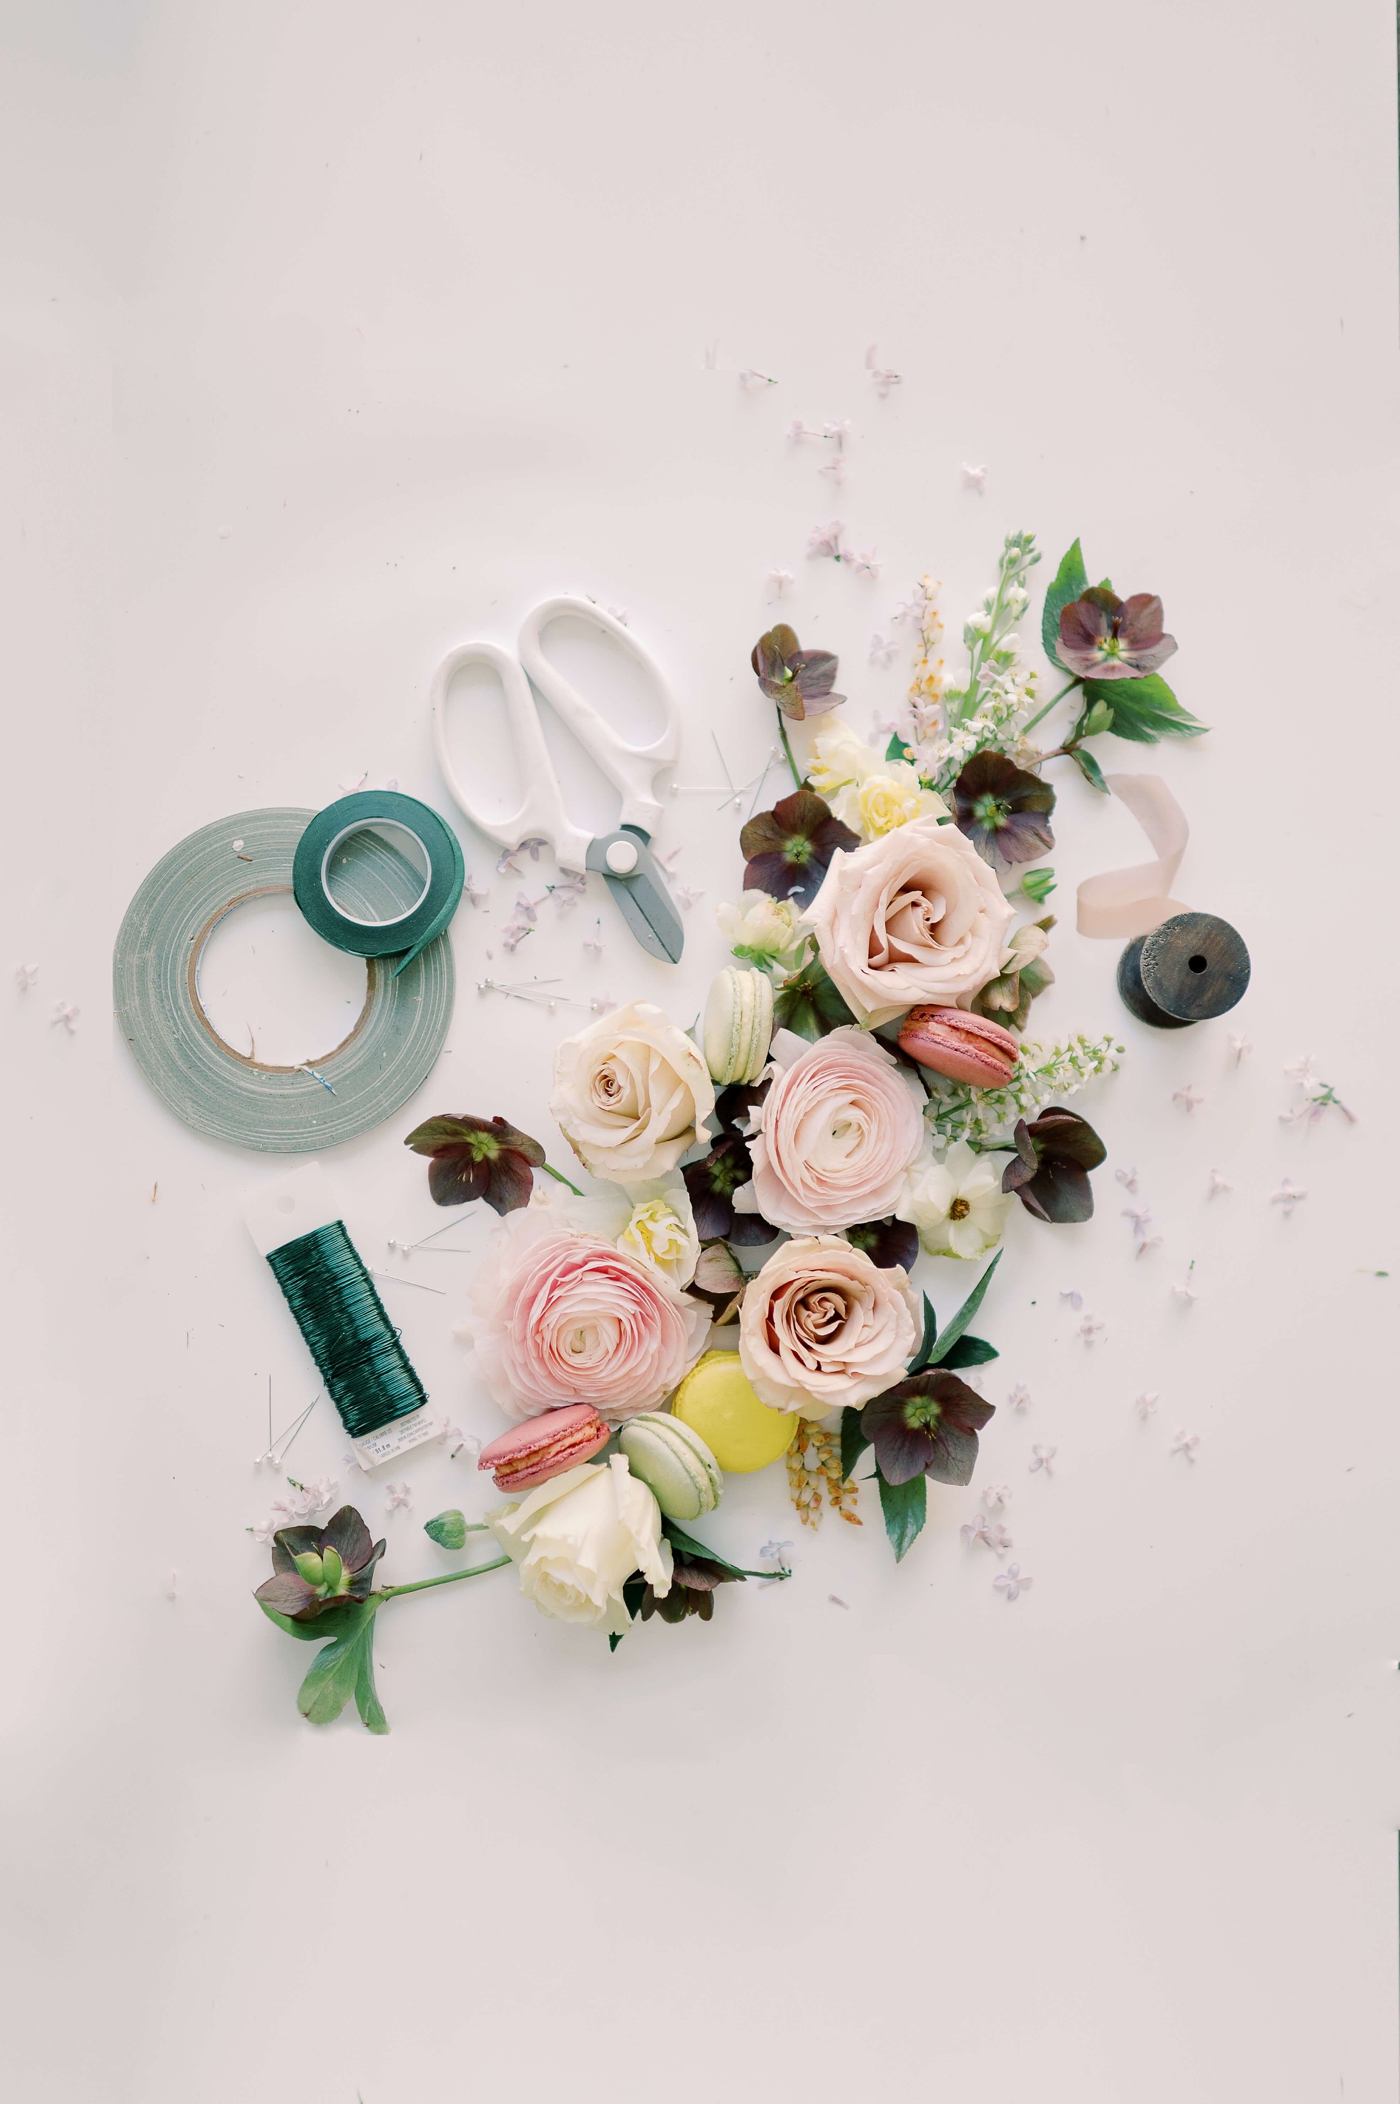 Flatlay photograph of flowers and macarons with florist's shears, ribbon, and twine